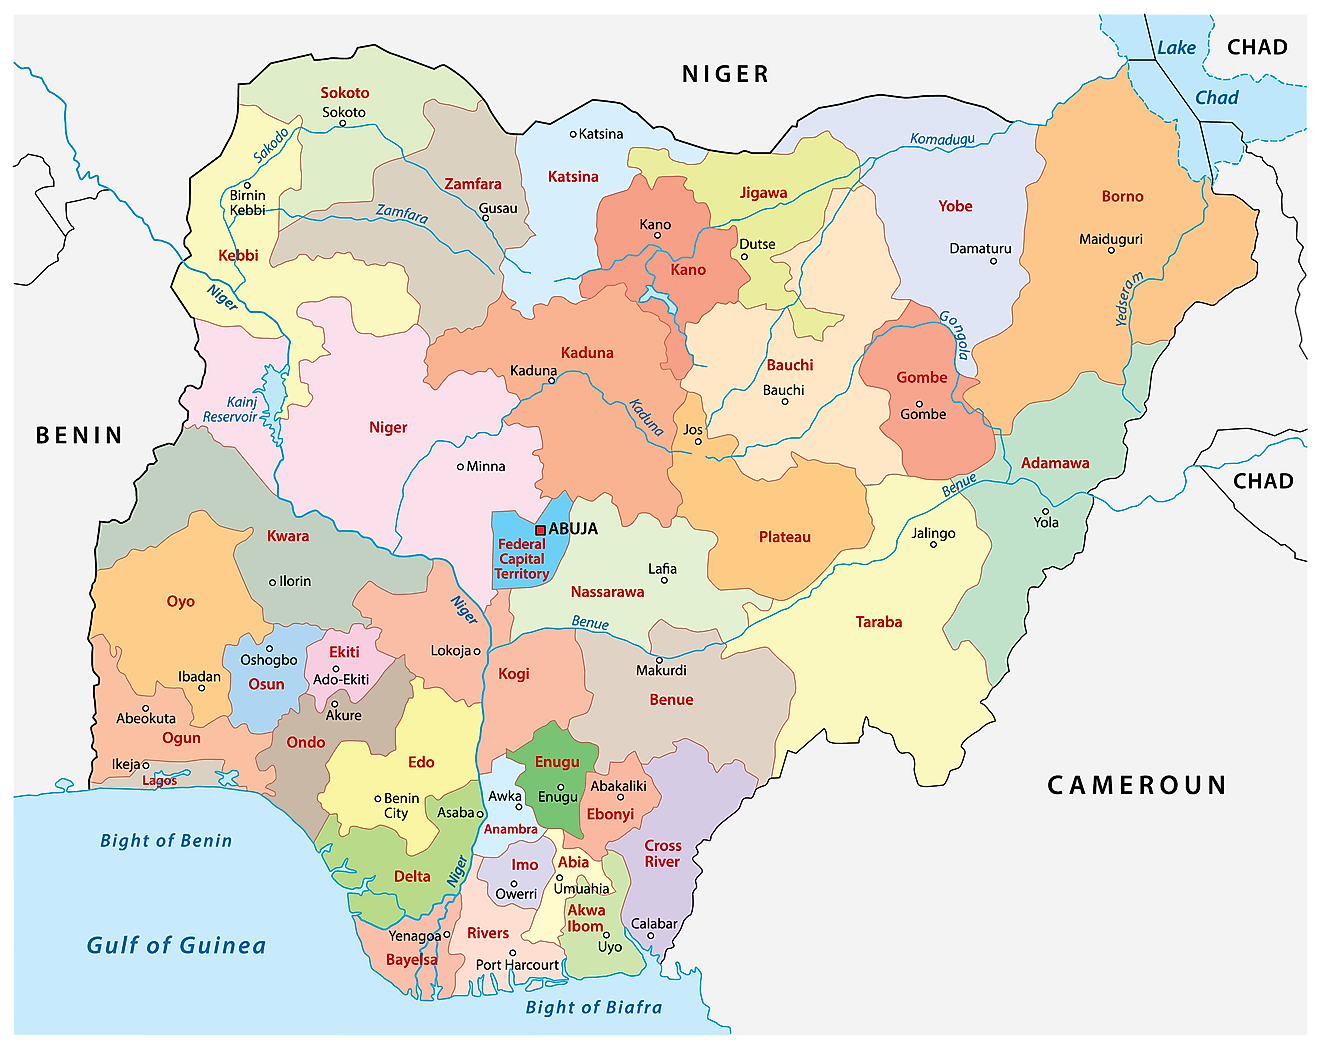 Political Map of Nigeria with 36 states, their capitals, and the Federal Capital Territory of Abuja.